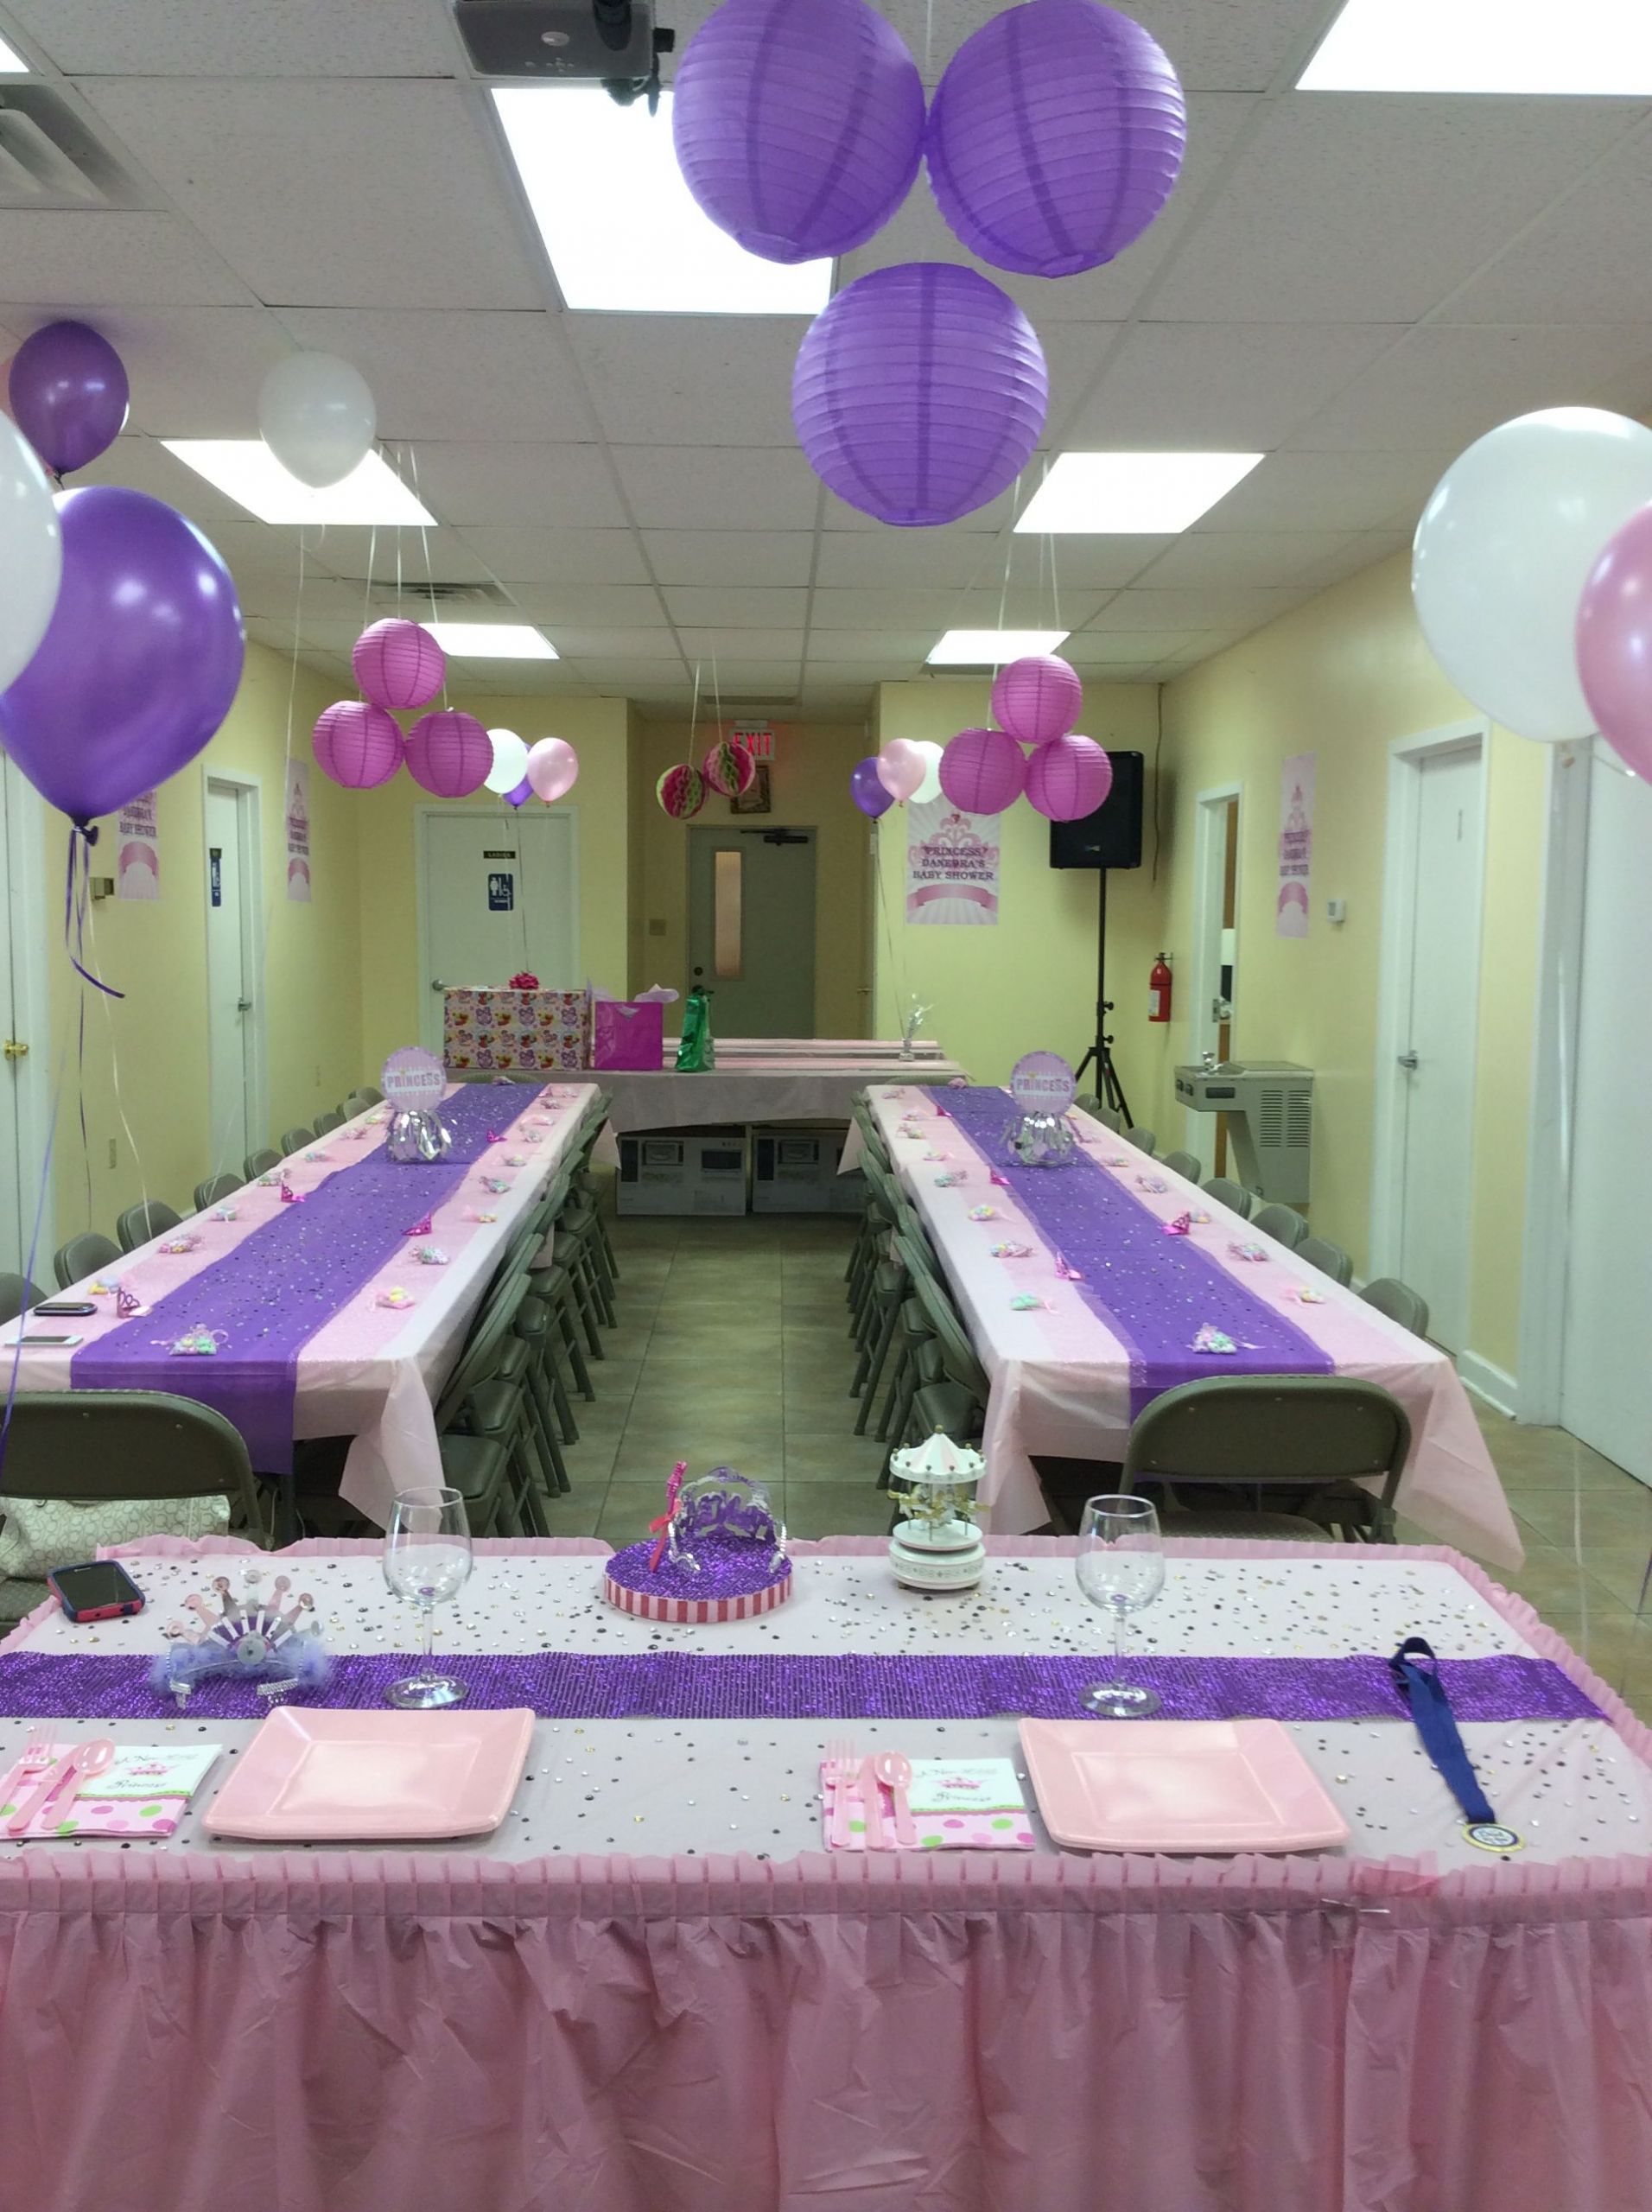 Baby Shower Hall Decoration Ideas
 A New Little Princess Baby Shower Hall Decorations